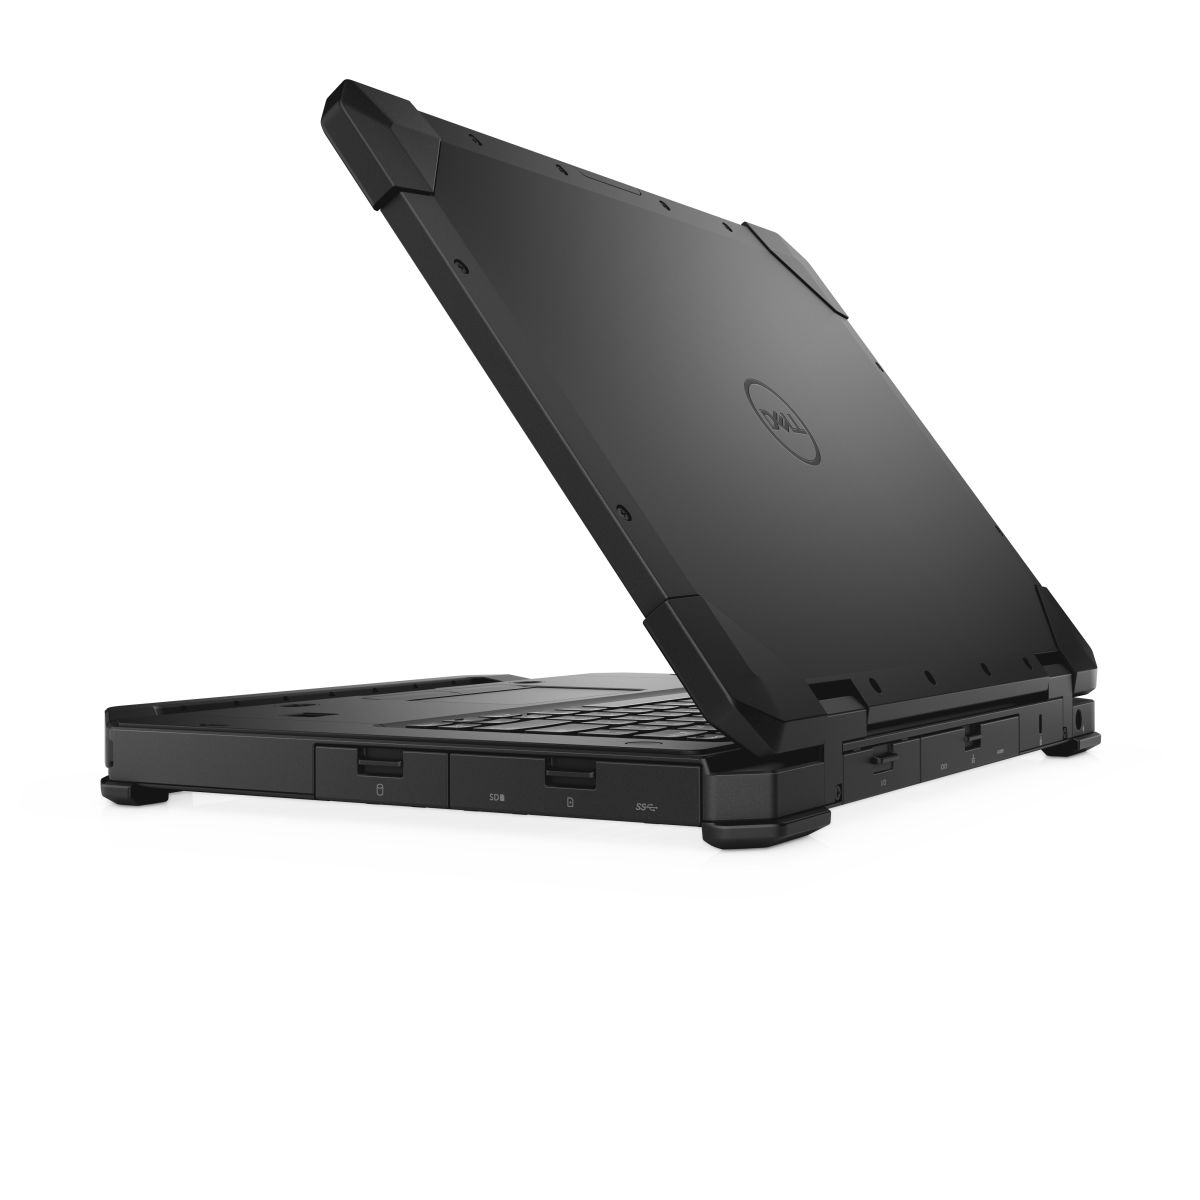 Dell Latitude Rugged 5420 6yngk Laptop Specifications